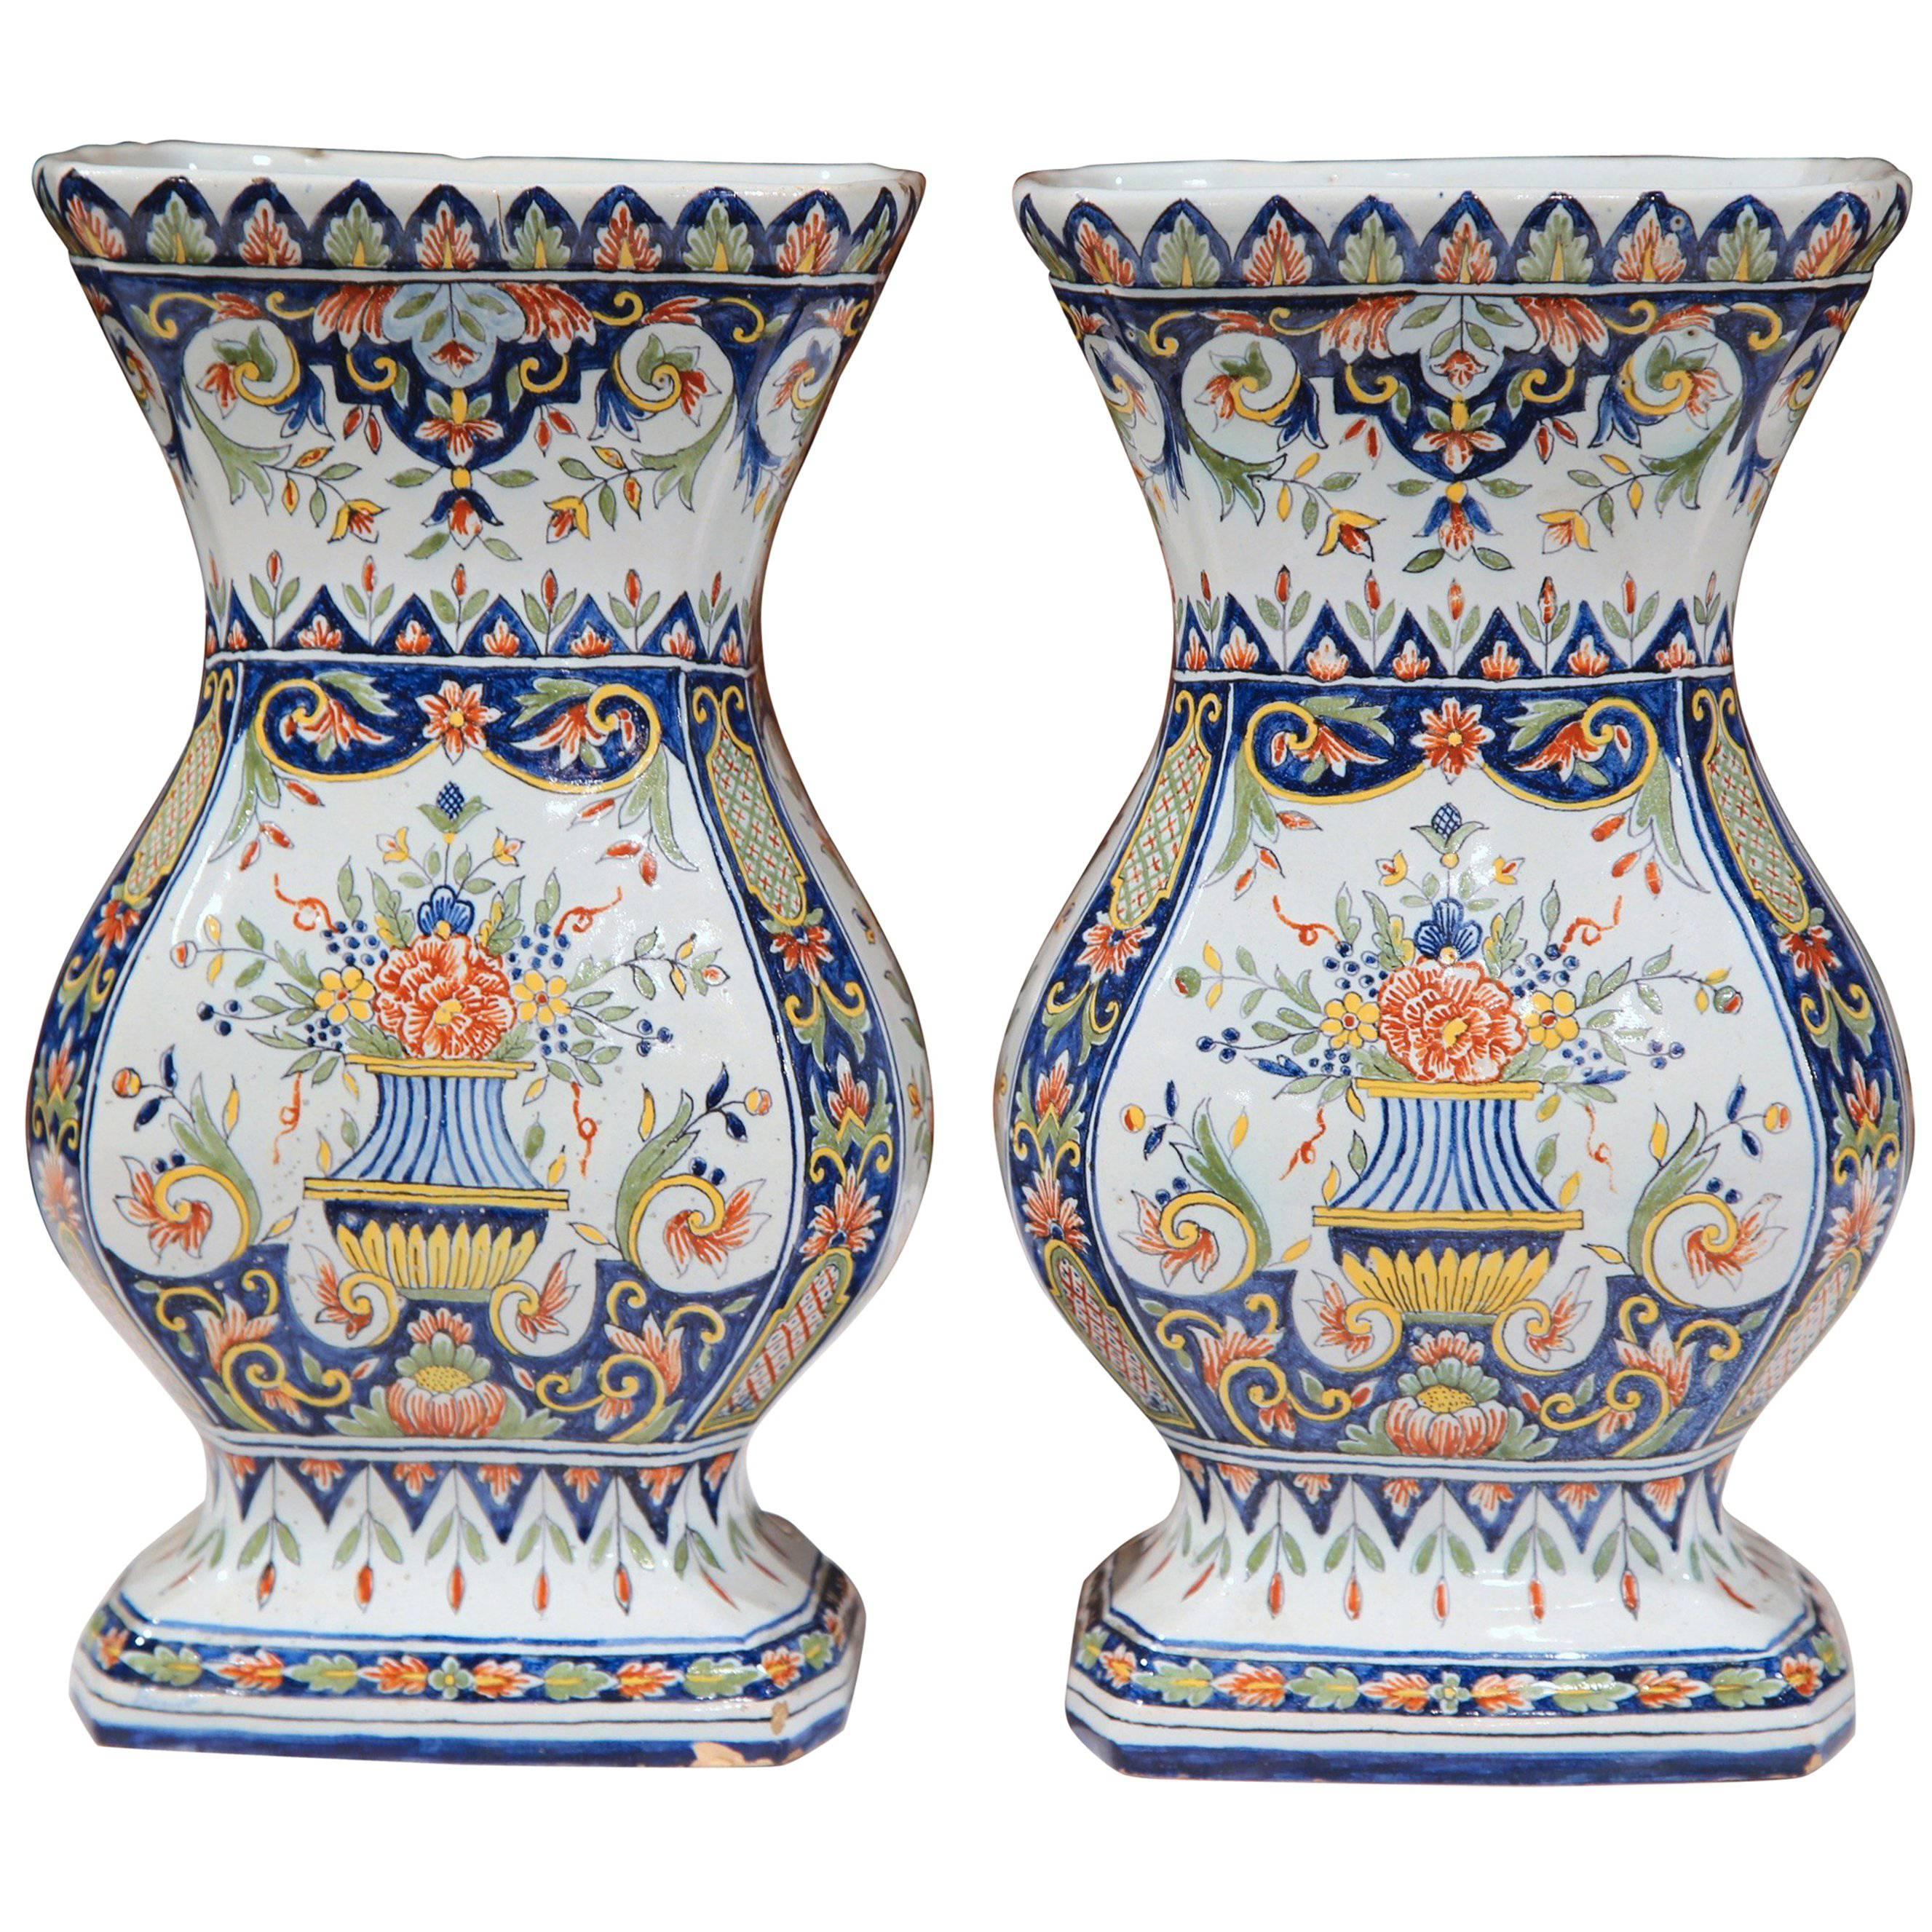 Pair of 19th Century French Hand-Painted Faience Vases from Normandy